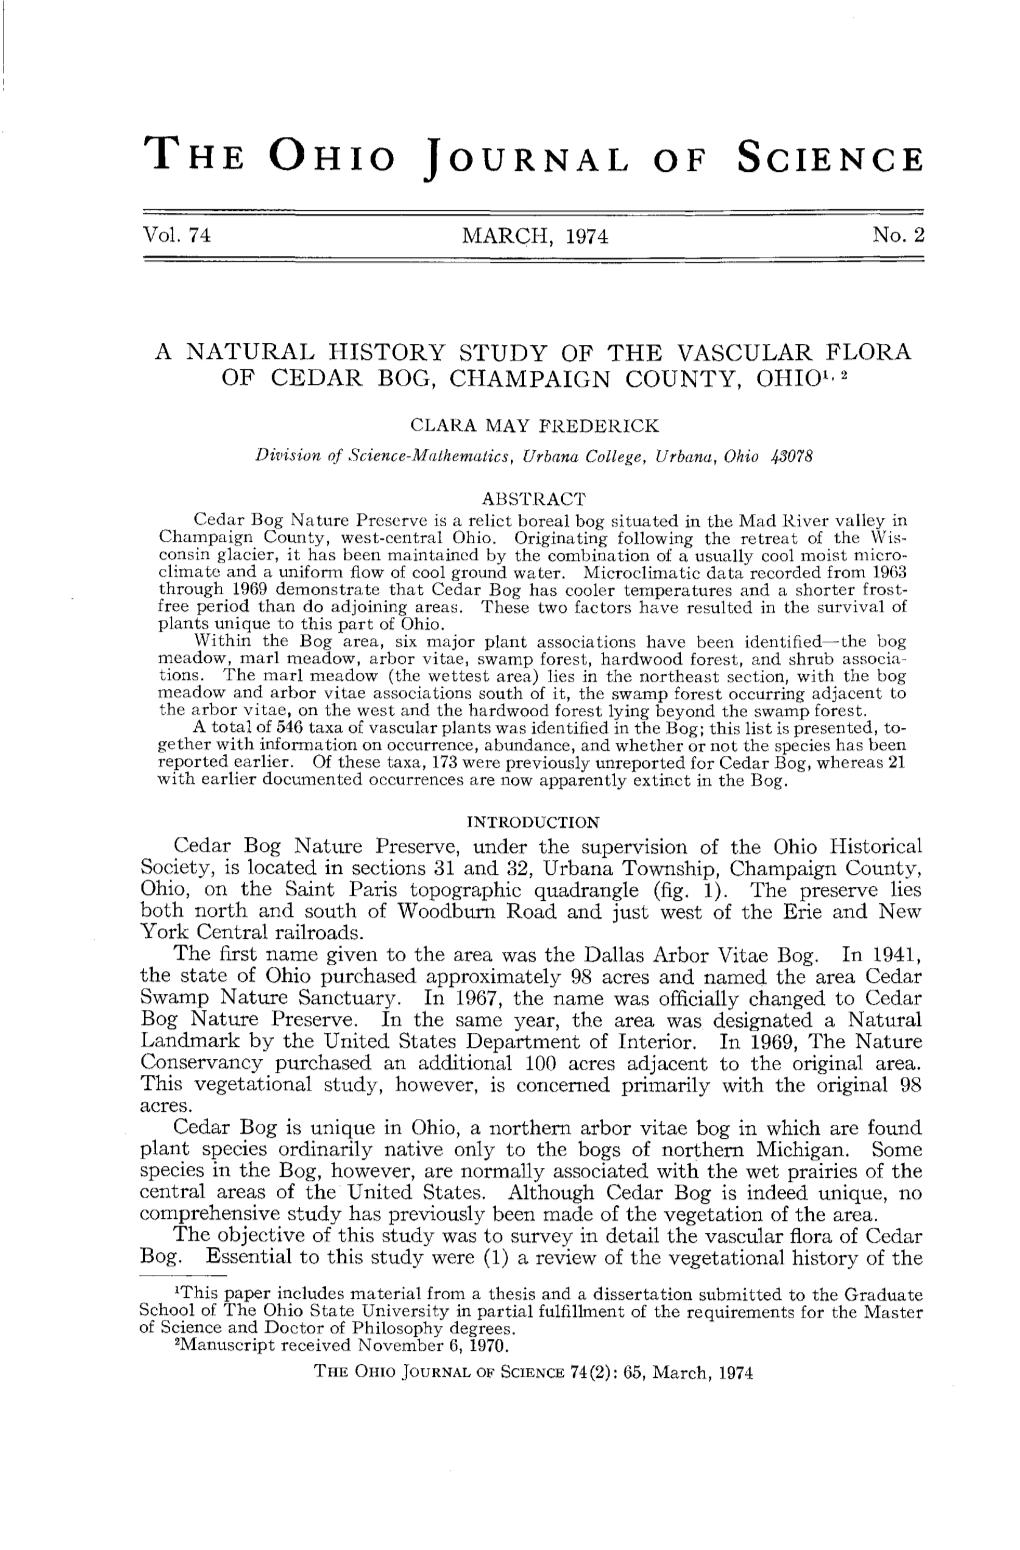 A Natural History Study of the Vascular Flora of Cedar Bog, Champaign County, Ohio12